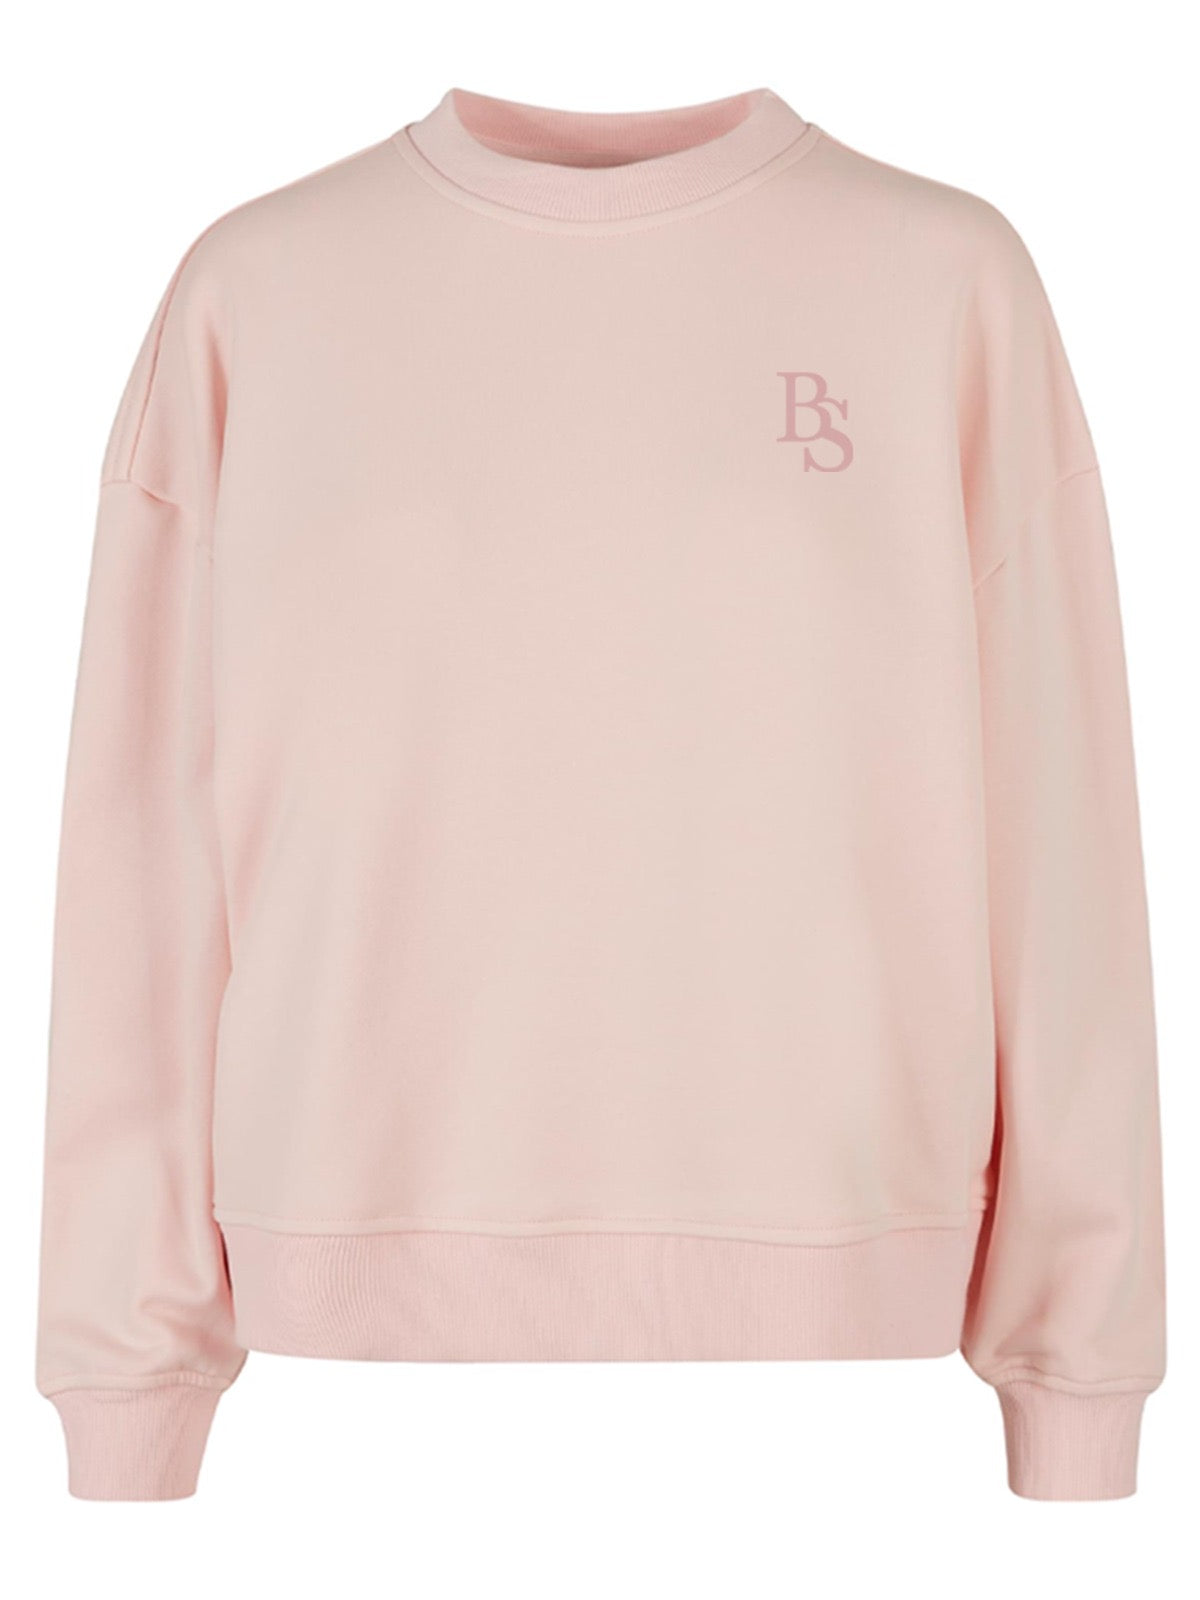 BSN COUTURE Mid Sweater - Pink